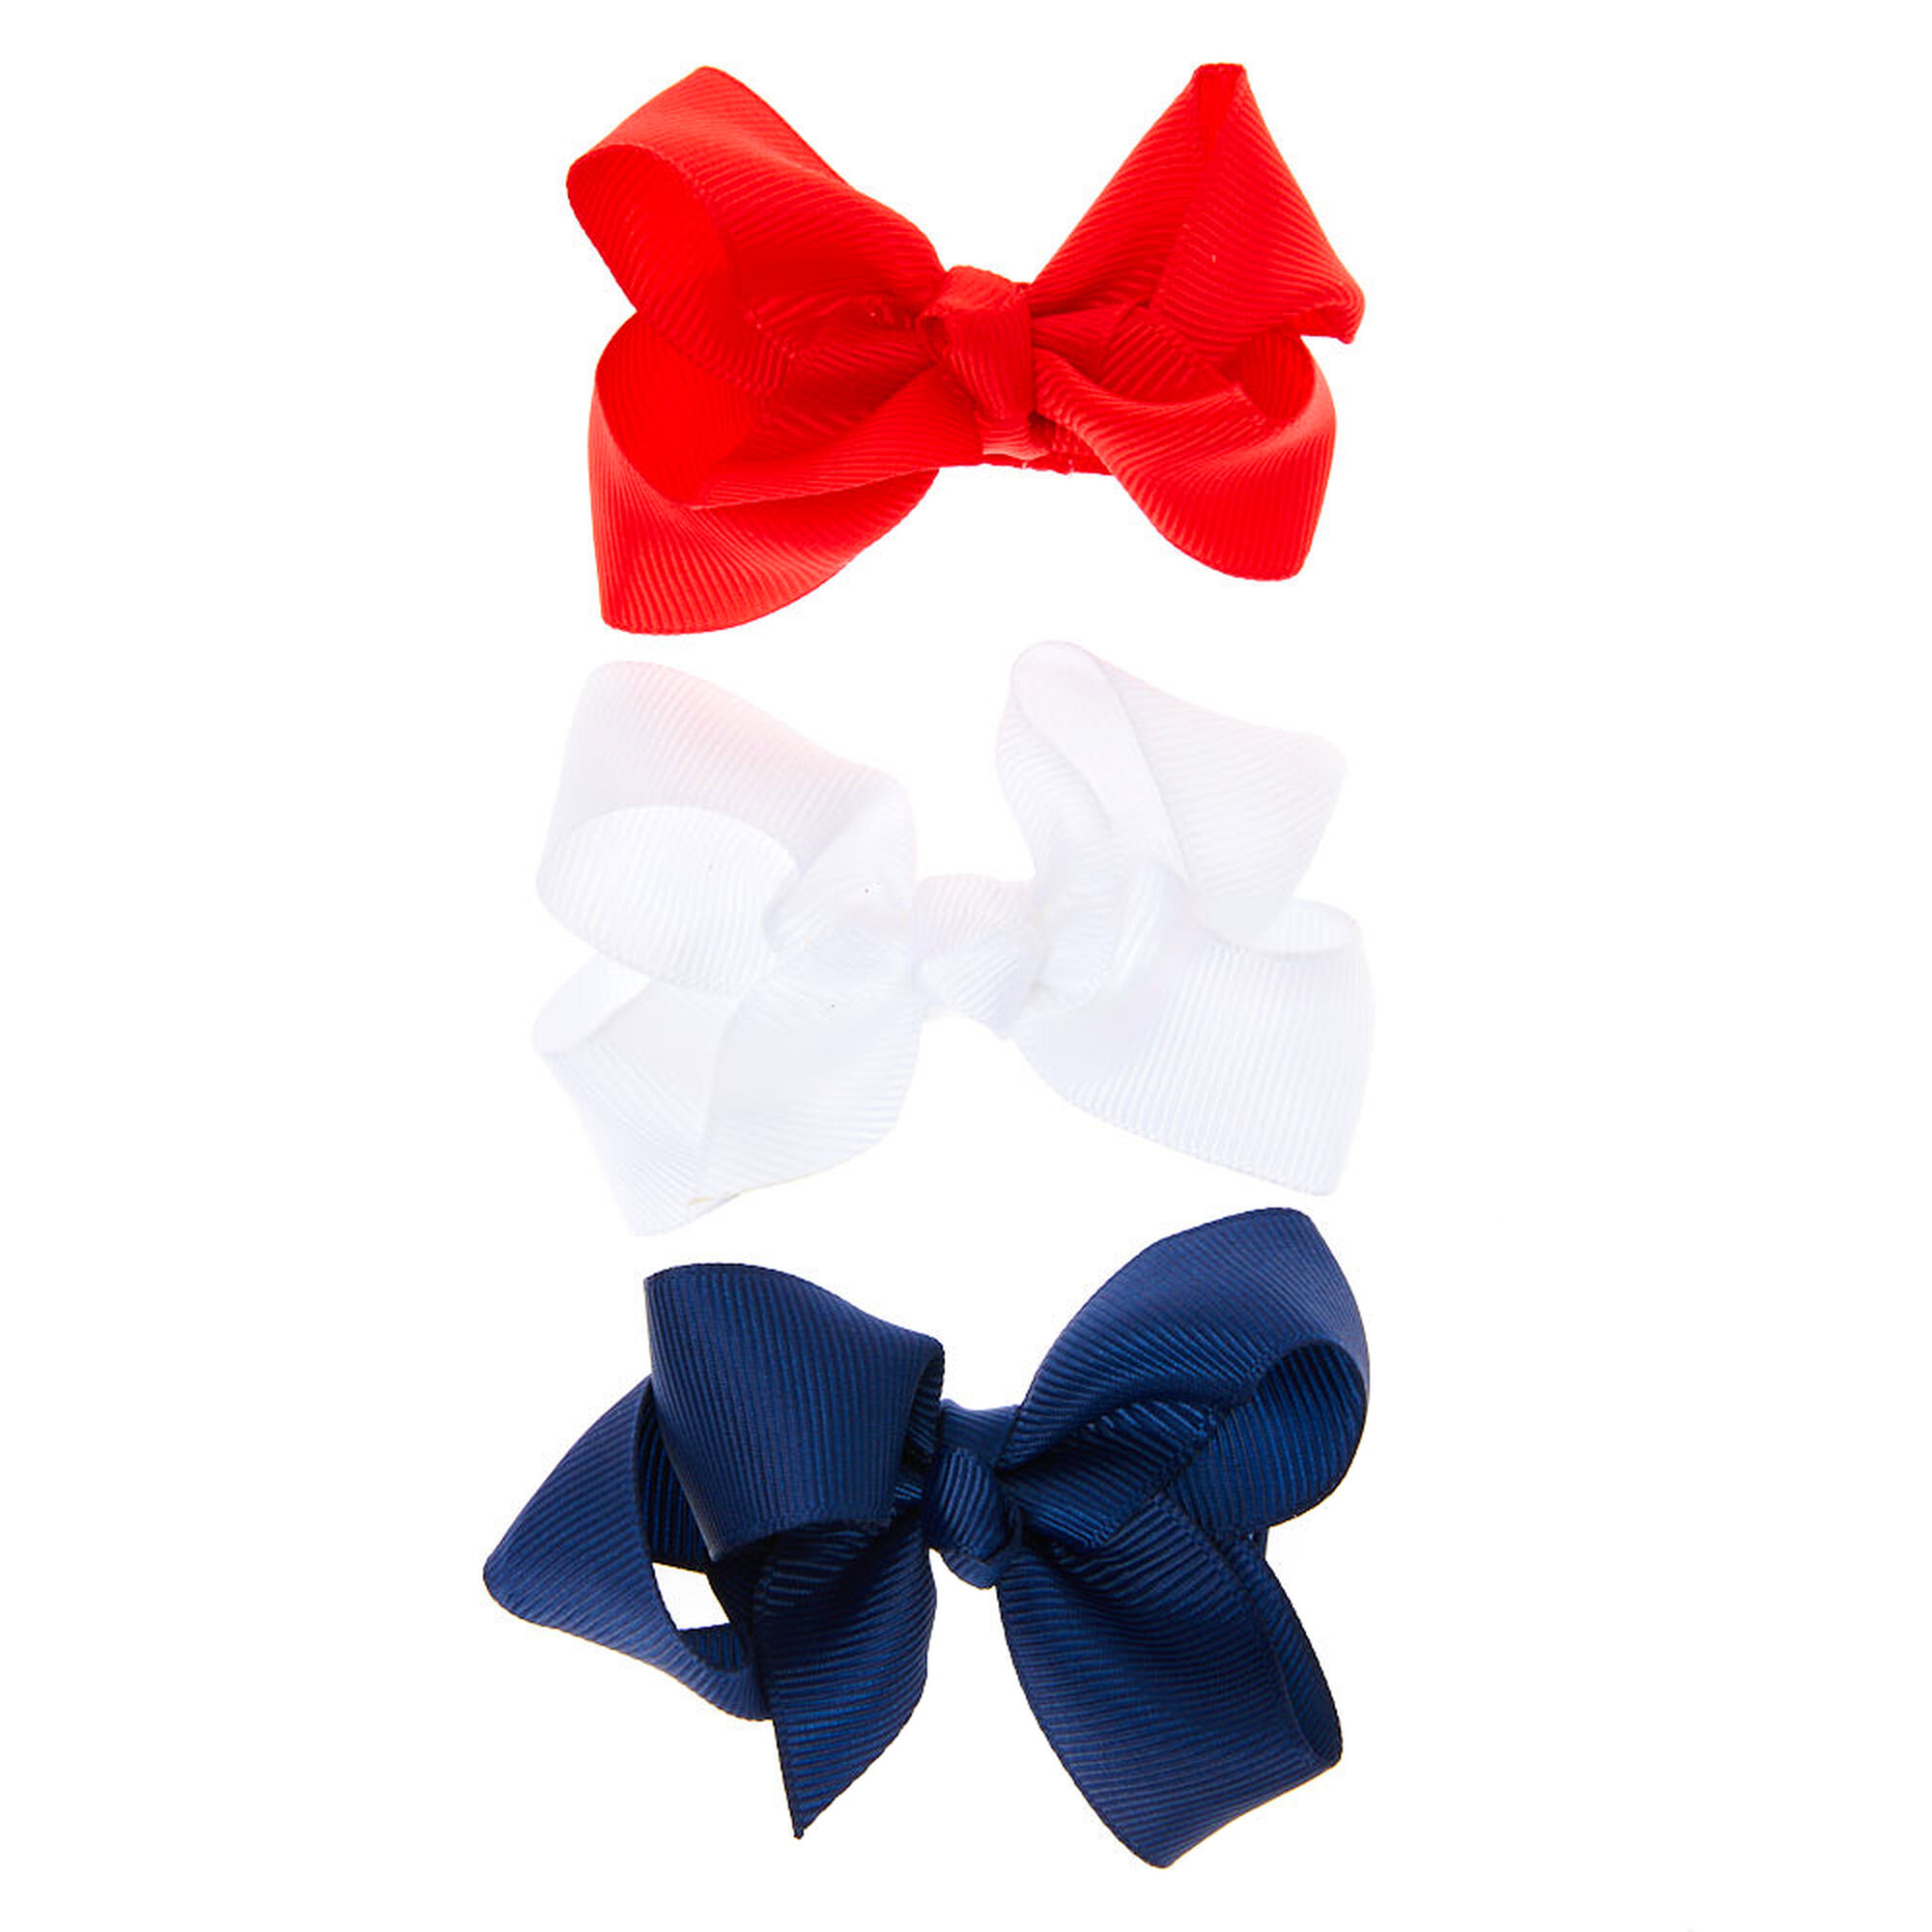 View Claires Club Ribbon Hair Bow Clips 3 Pack information